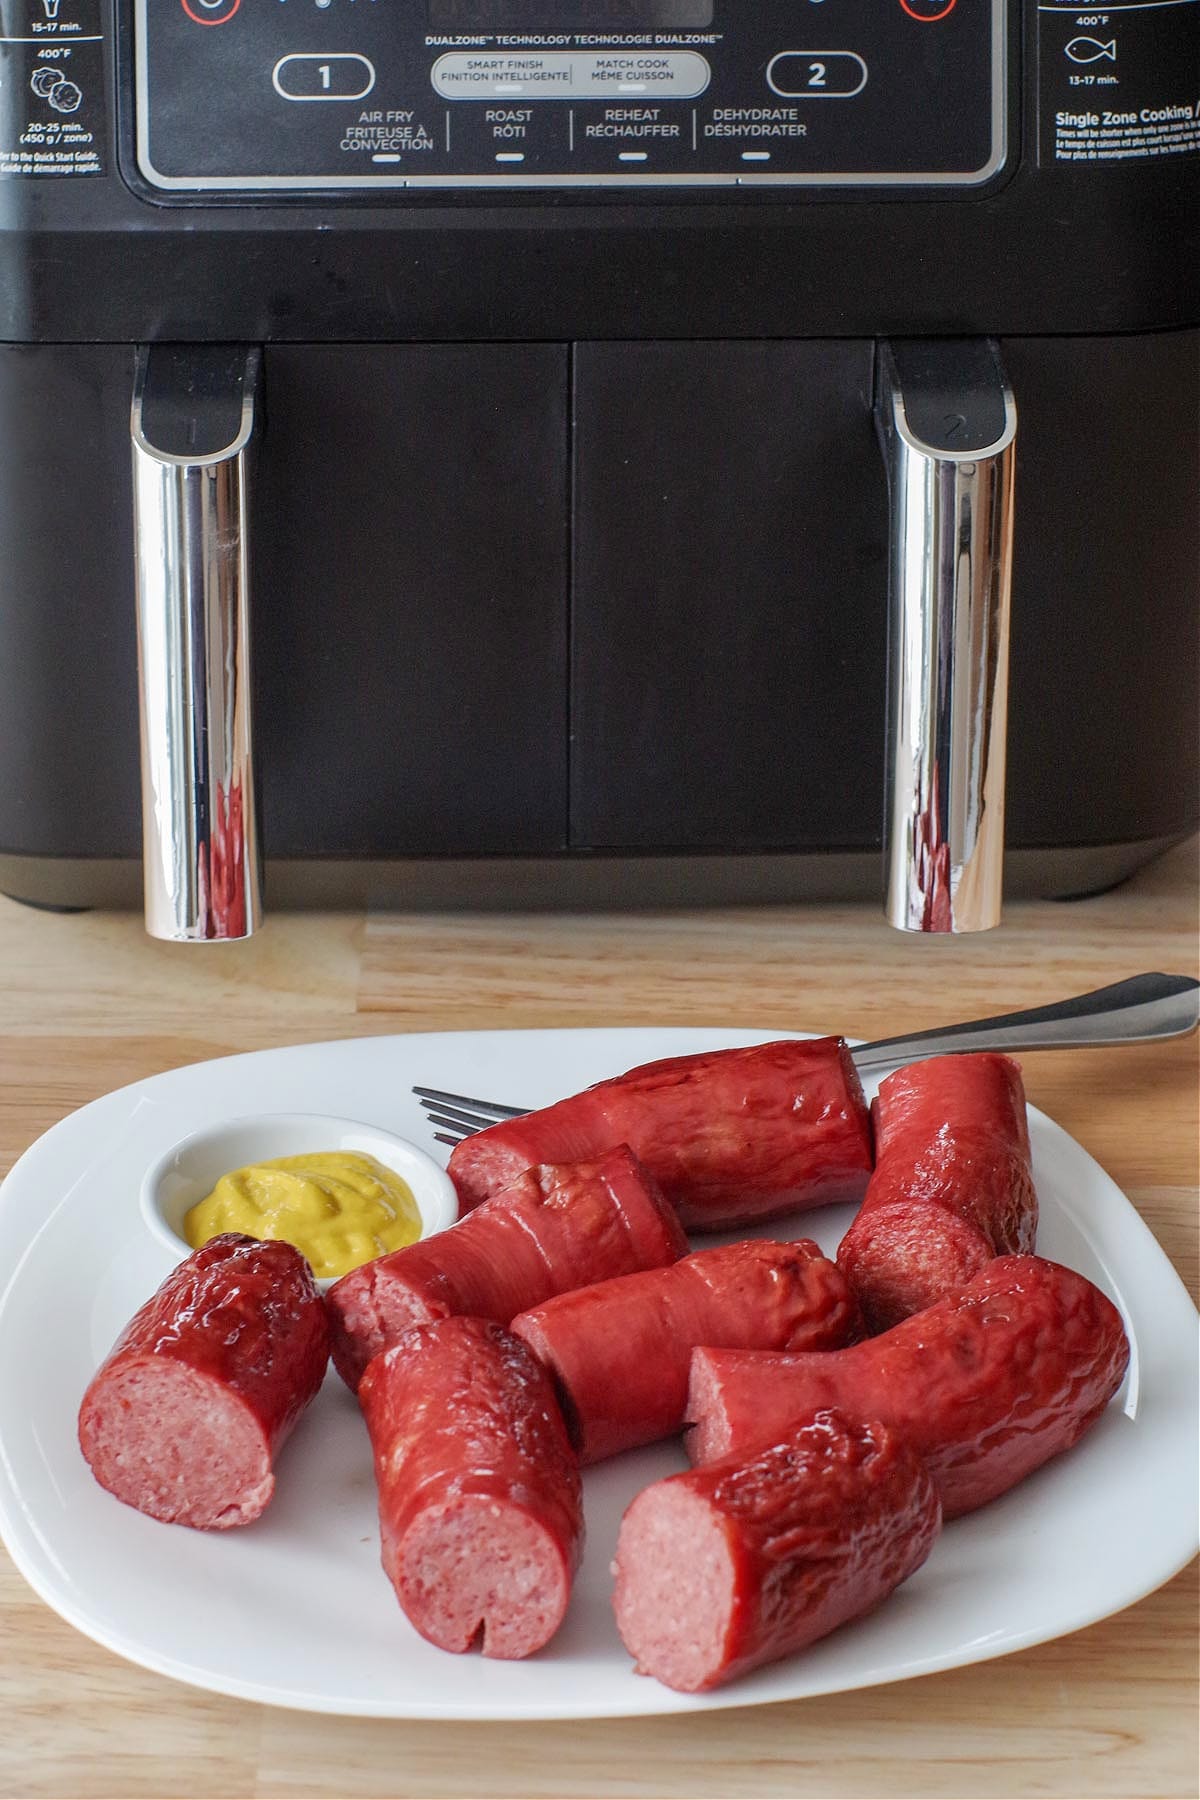 kielbasa on a white plate with a small white dish of mustard and tongs, with an air fryer in the background